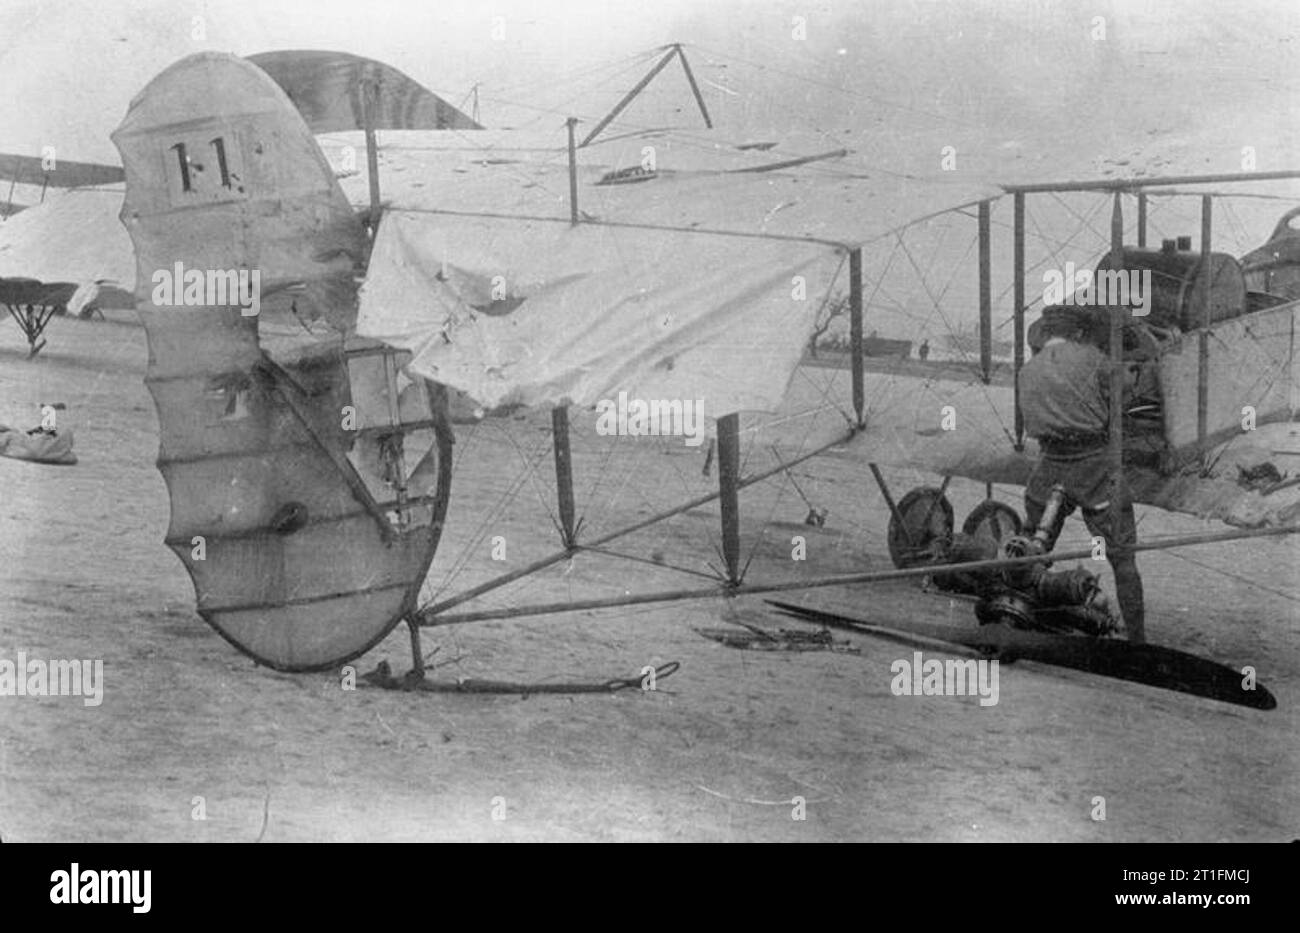 Knatchbull M (capt the Hon) Collection No. 3 Squadron R. N. A. S. Henri Farman aeroplane which had been hit in the air by Turkish gun fire but landed safely. Pilot: Fleet-Commander R. Marix, D. S. O. Observer: Lieutenant the Hon M. Knatchbull, M. C. Gallipoli, June 1915. Stock Photo